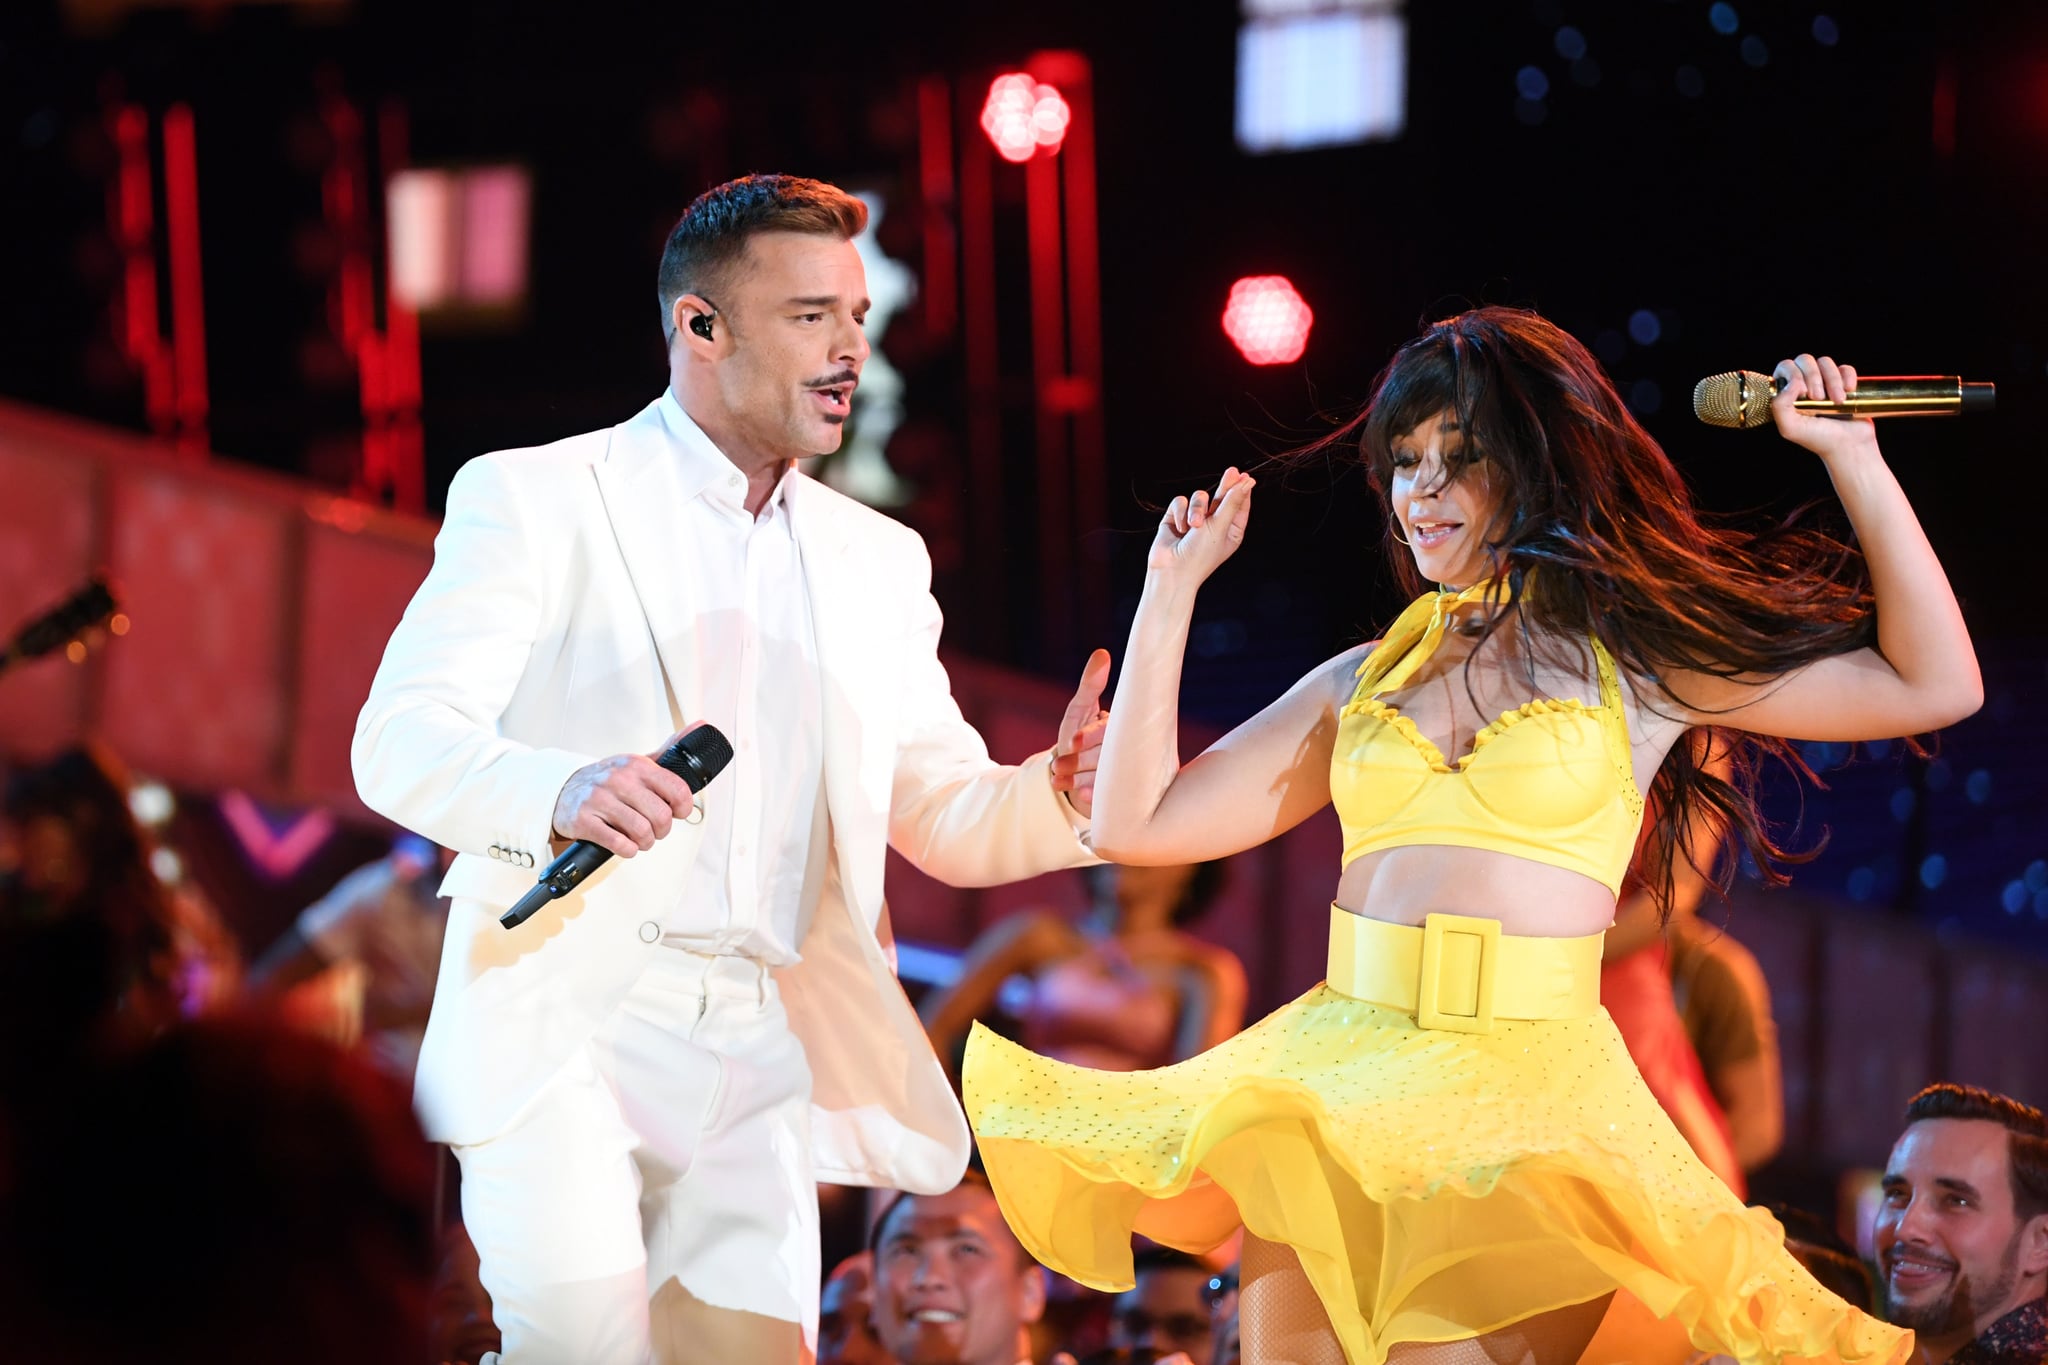 Ricky Martin and Camila Cabello danced together onstage at the 2019 show.